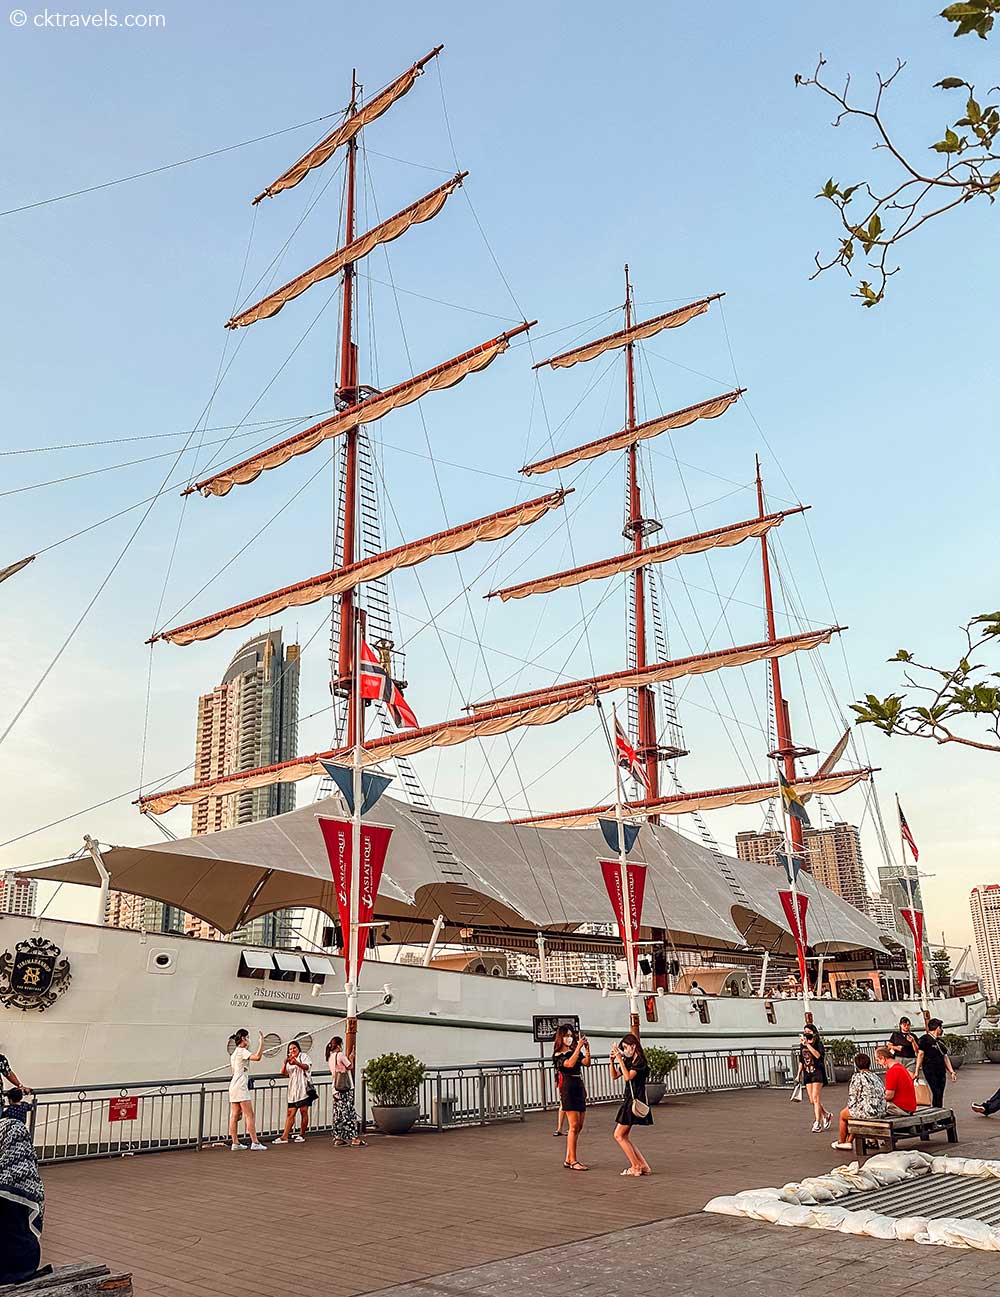 Sirimahannop Tall Ship – The Heritage at Asiatique night market on Bangkok's Riverfront